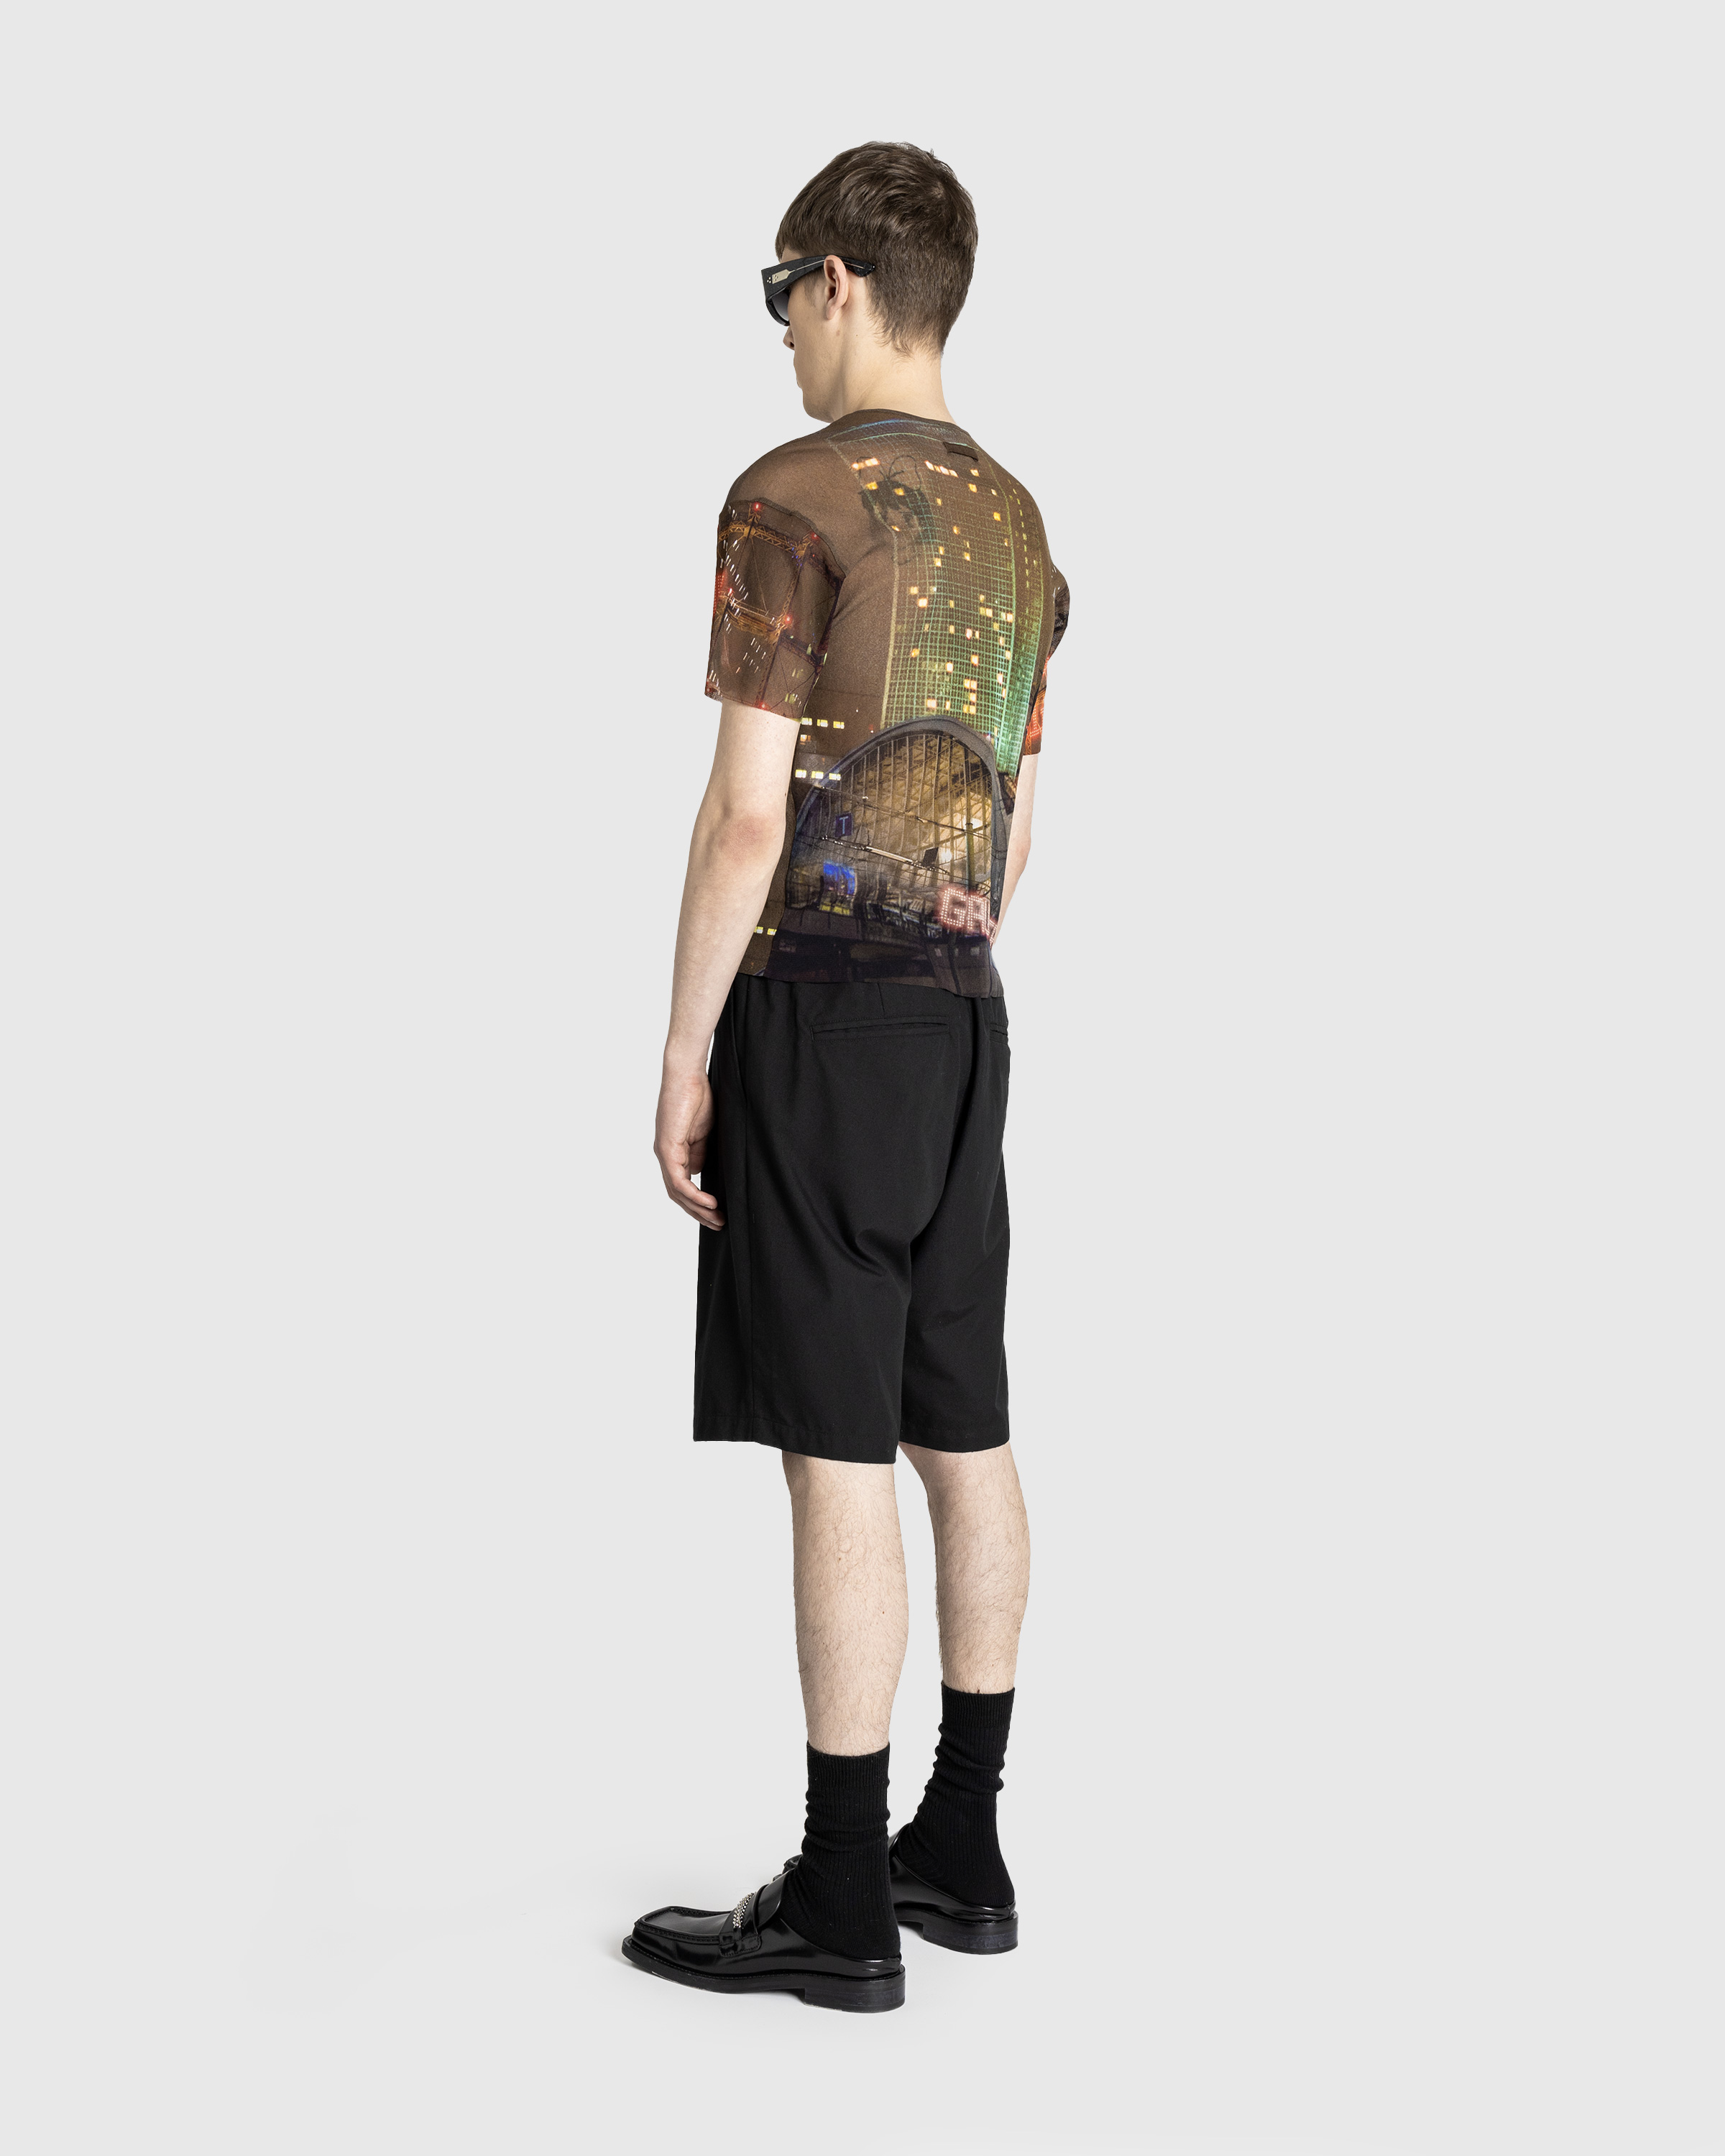 Jean Paul Gaultier x Shayne Oliver – Mesh Oversized Tee Printed "City" Brown/Green/Blue/Red - T-Shirts - Brown - Image 4